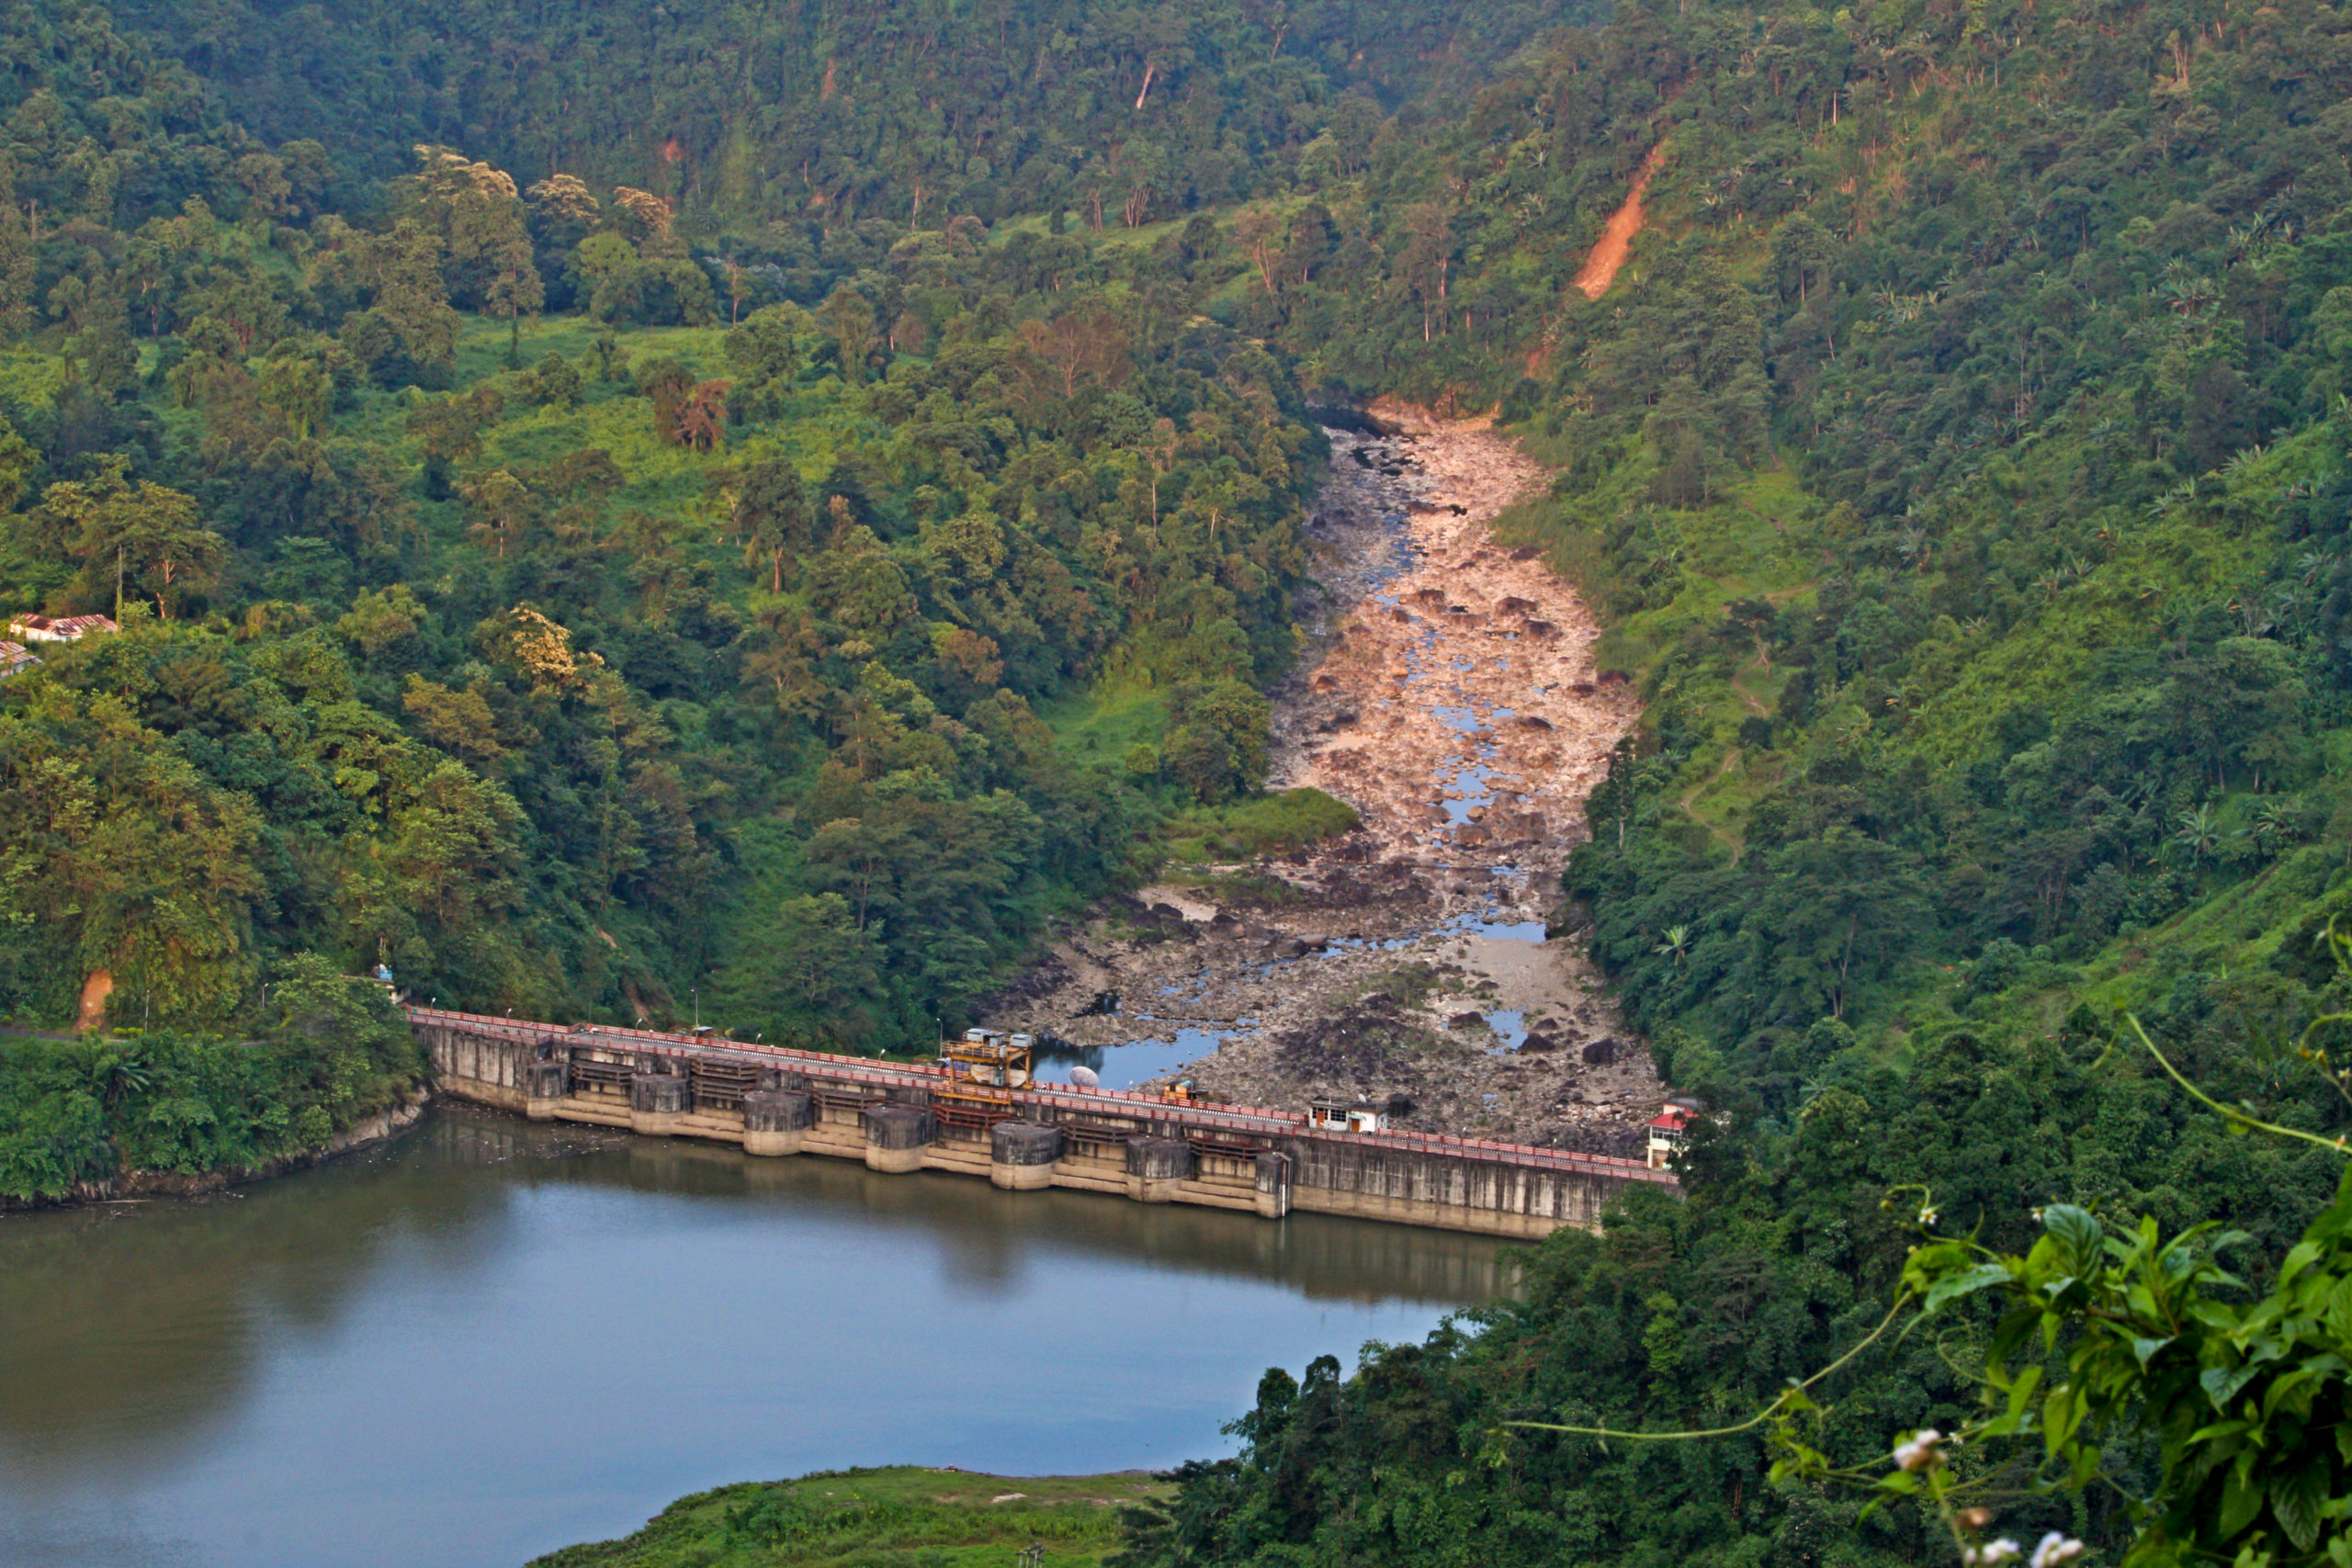 <p>The Ranganadi dam in Arunachal Pradesh. In February 2019 the dam released an unprecedented amount of silt, with severe impacts for the river’s biodiversity and the livelihoods of people who live along its banks. (Image: Karen Conniff / <a href="https://www.flickr.com/photos/water_alternatives/40760068185/">Flickr</a>, <a href="https://creativecommons.org/licenses/by-nc/2.0/">CC BY-NC 2.0</a>)</p>